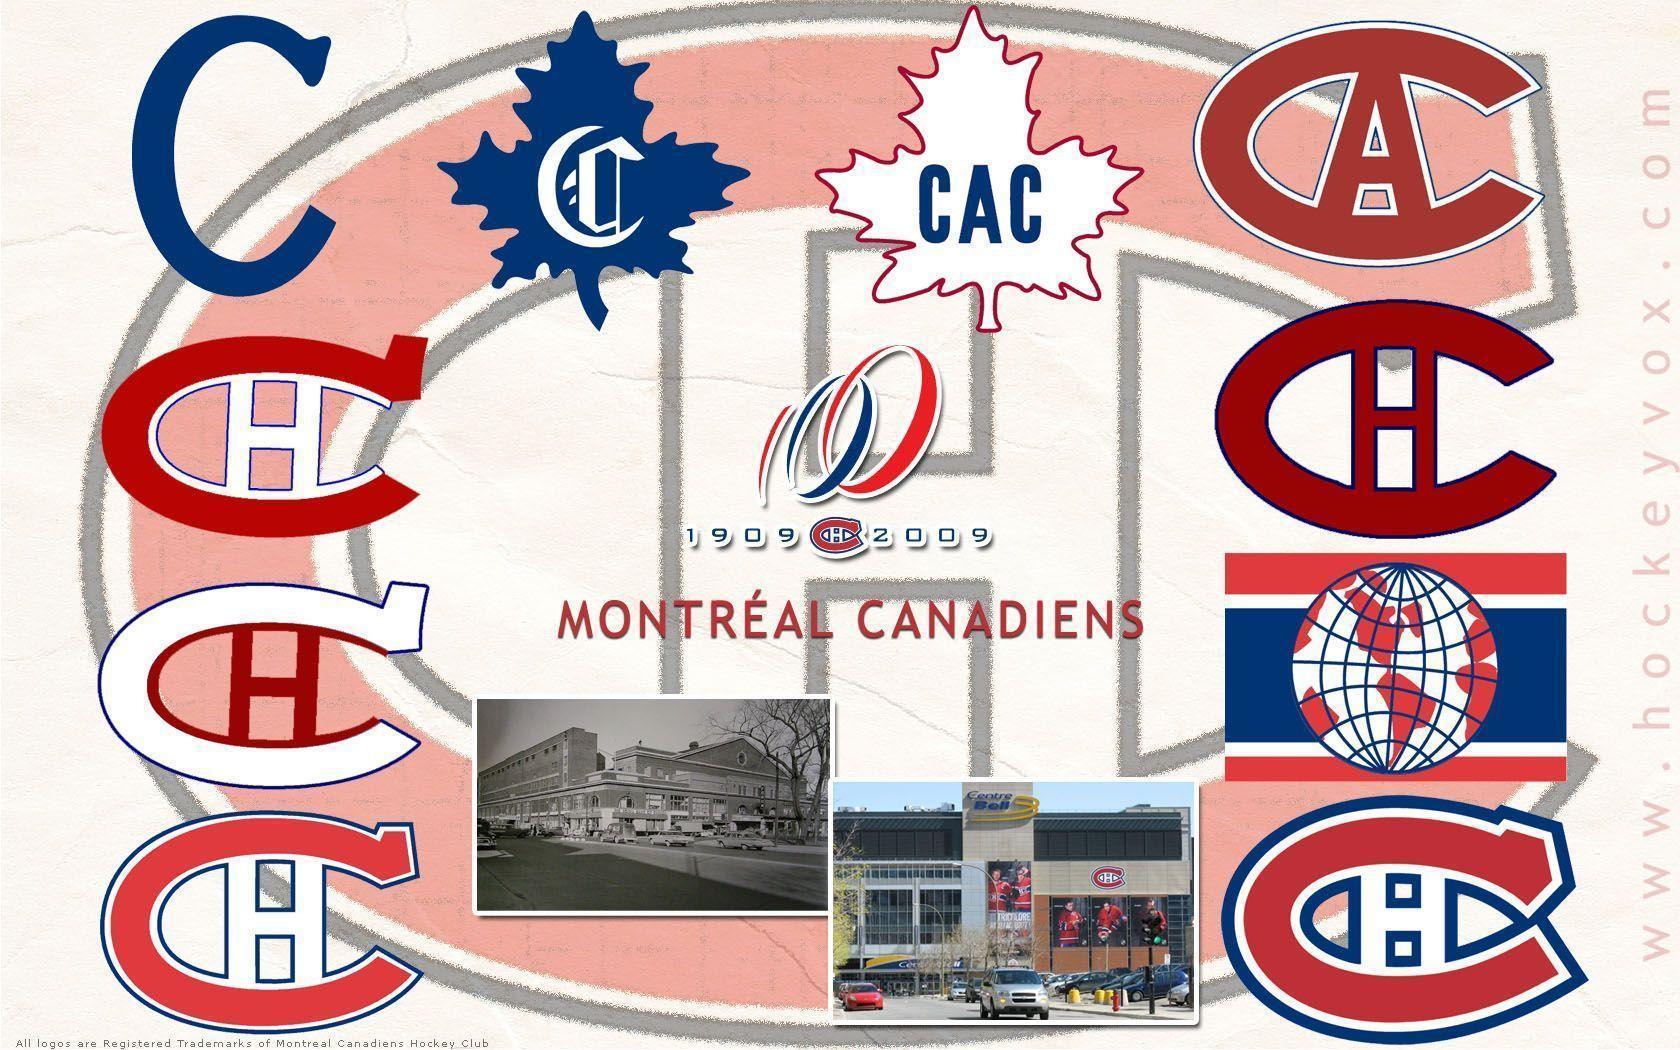 Montreal Canadiens background. Montreal Canadiens wallpaper